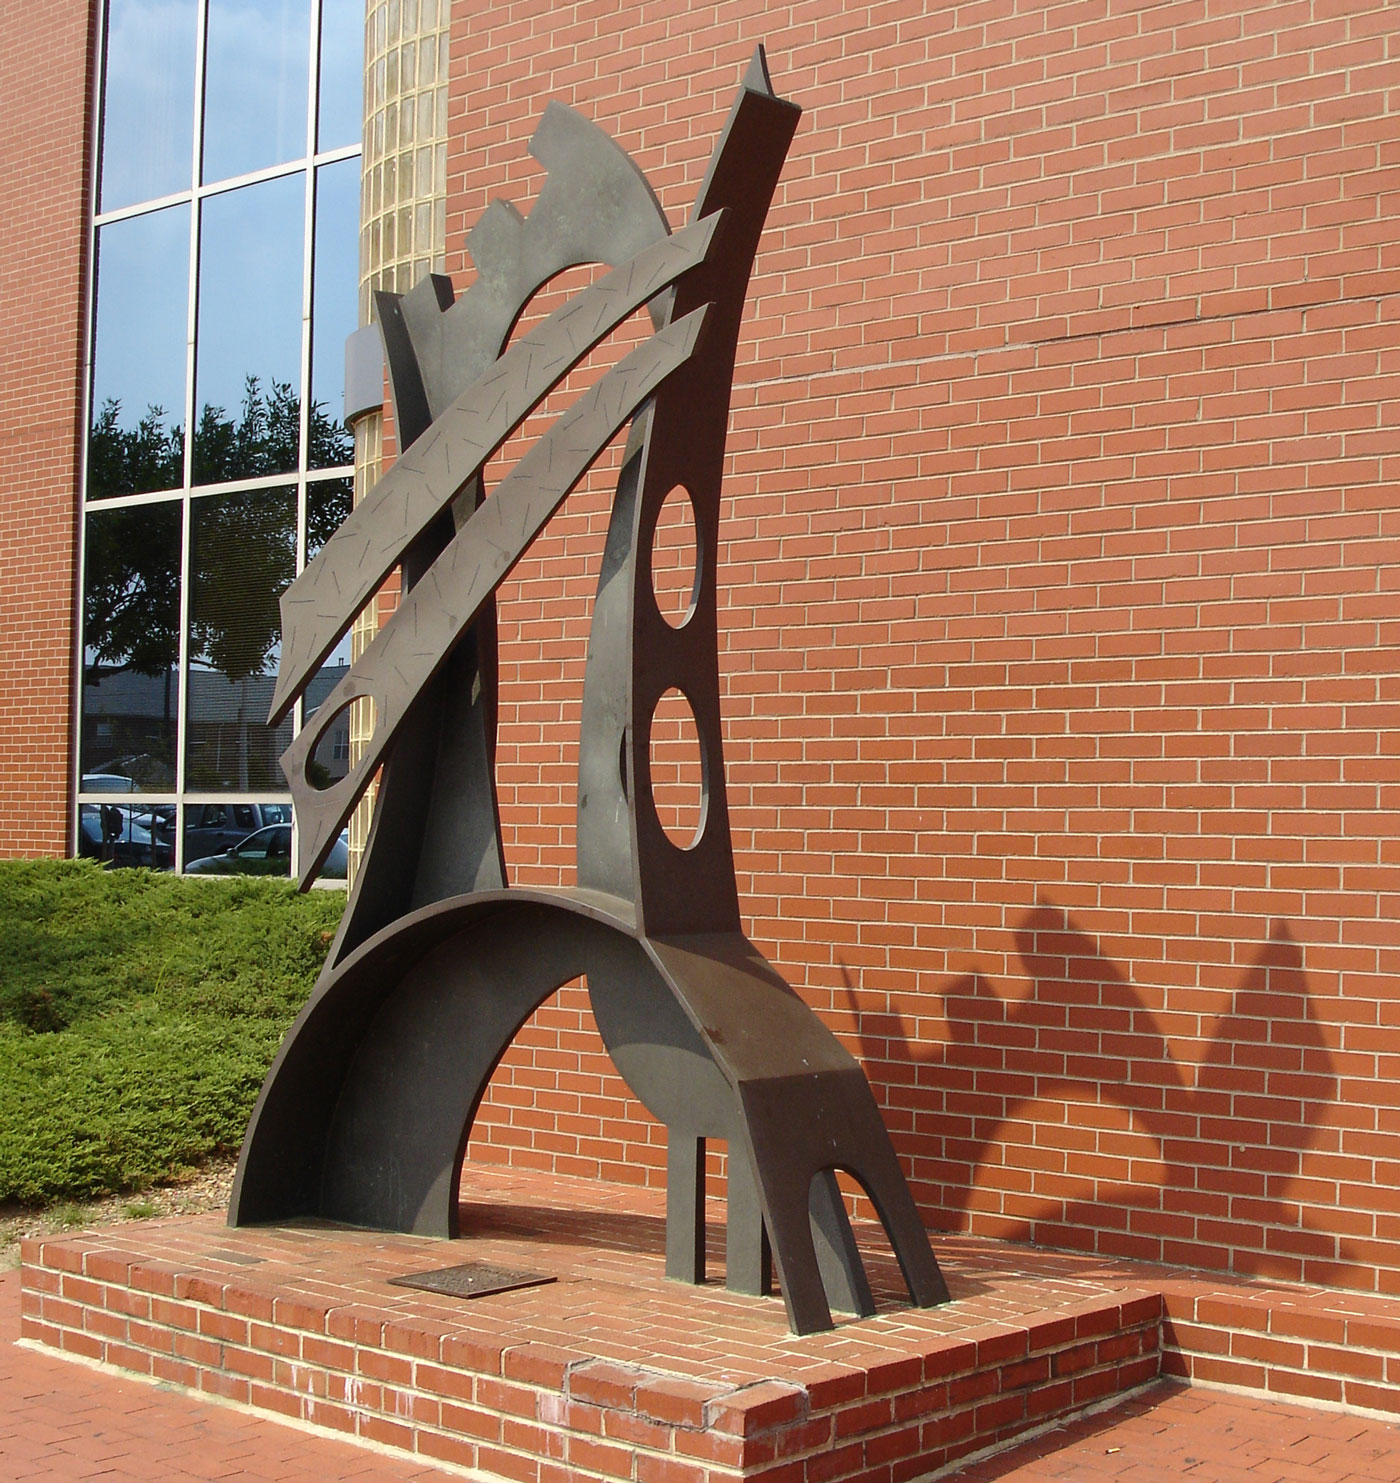 11-foot-tall bronze abstract sculpture, on concrete and brick base, by Philadelphia artist Charles Searles. Sculpture is in front of a red brick wall.